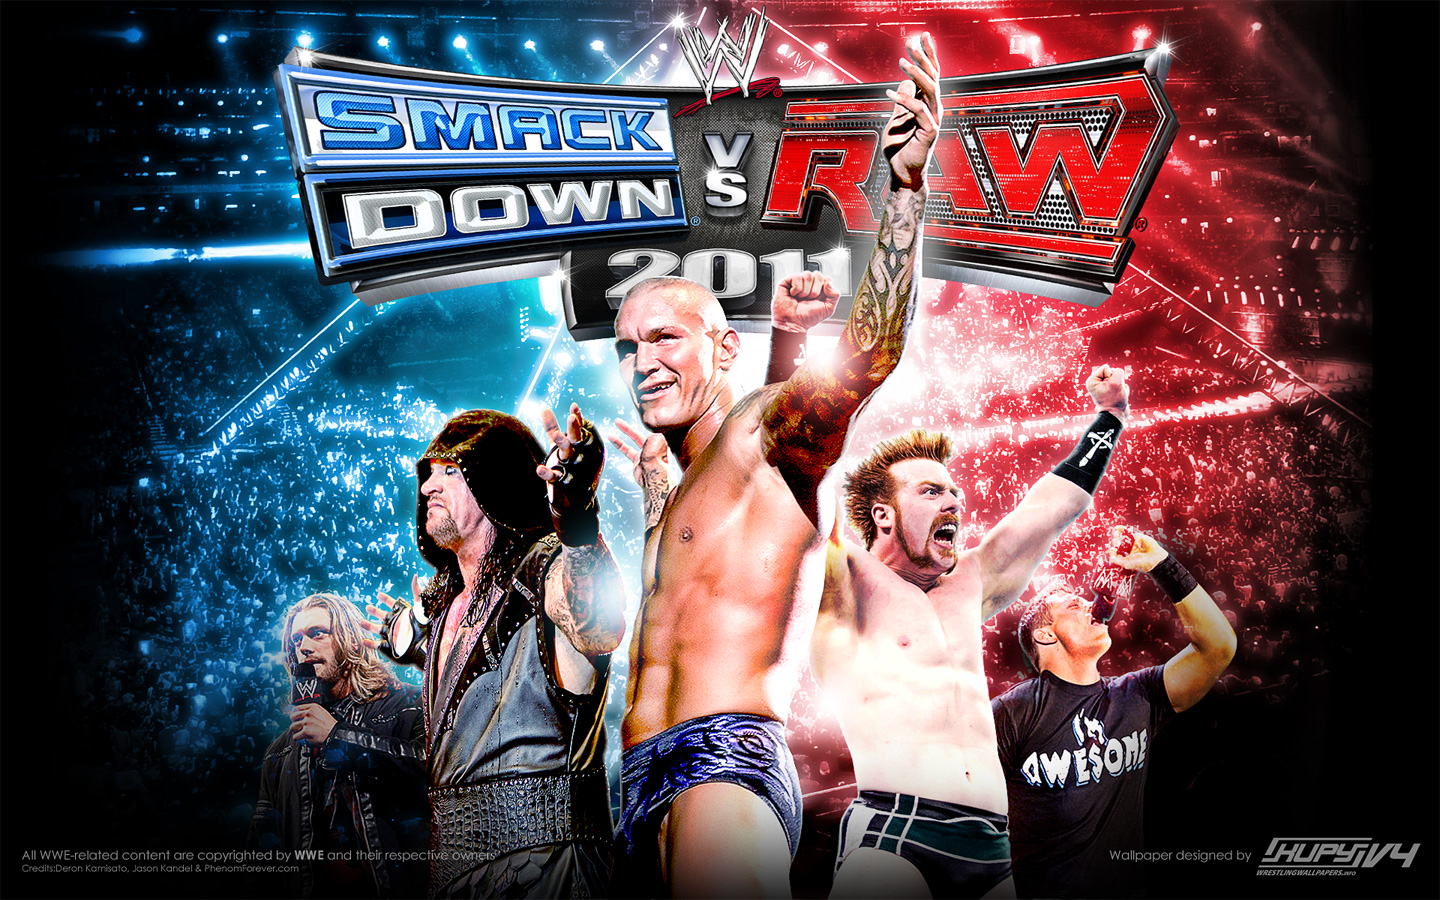 WWE Smackdown Vs Raw Free Download PC Game